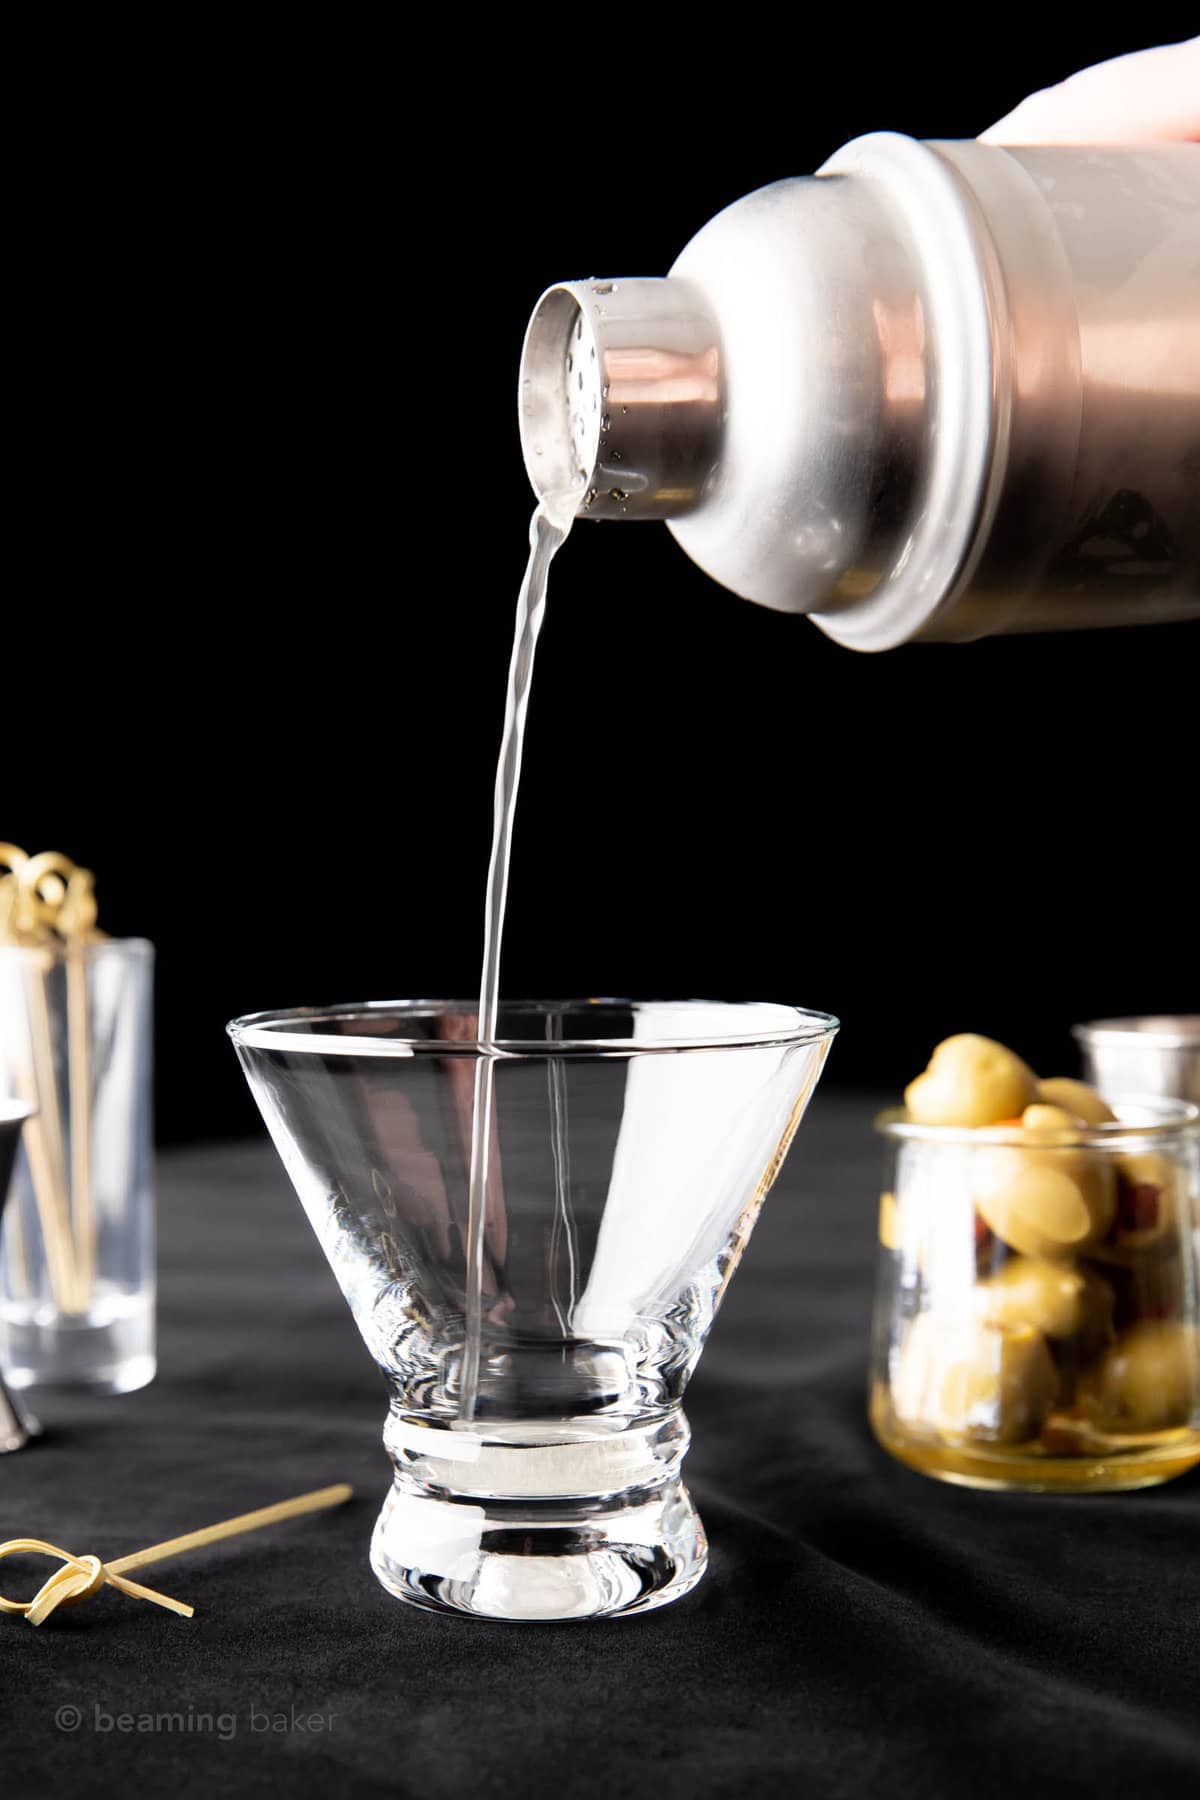 A hand pouring liquid from a stainless steel cocktail shaker into a martini glass